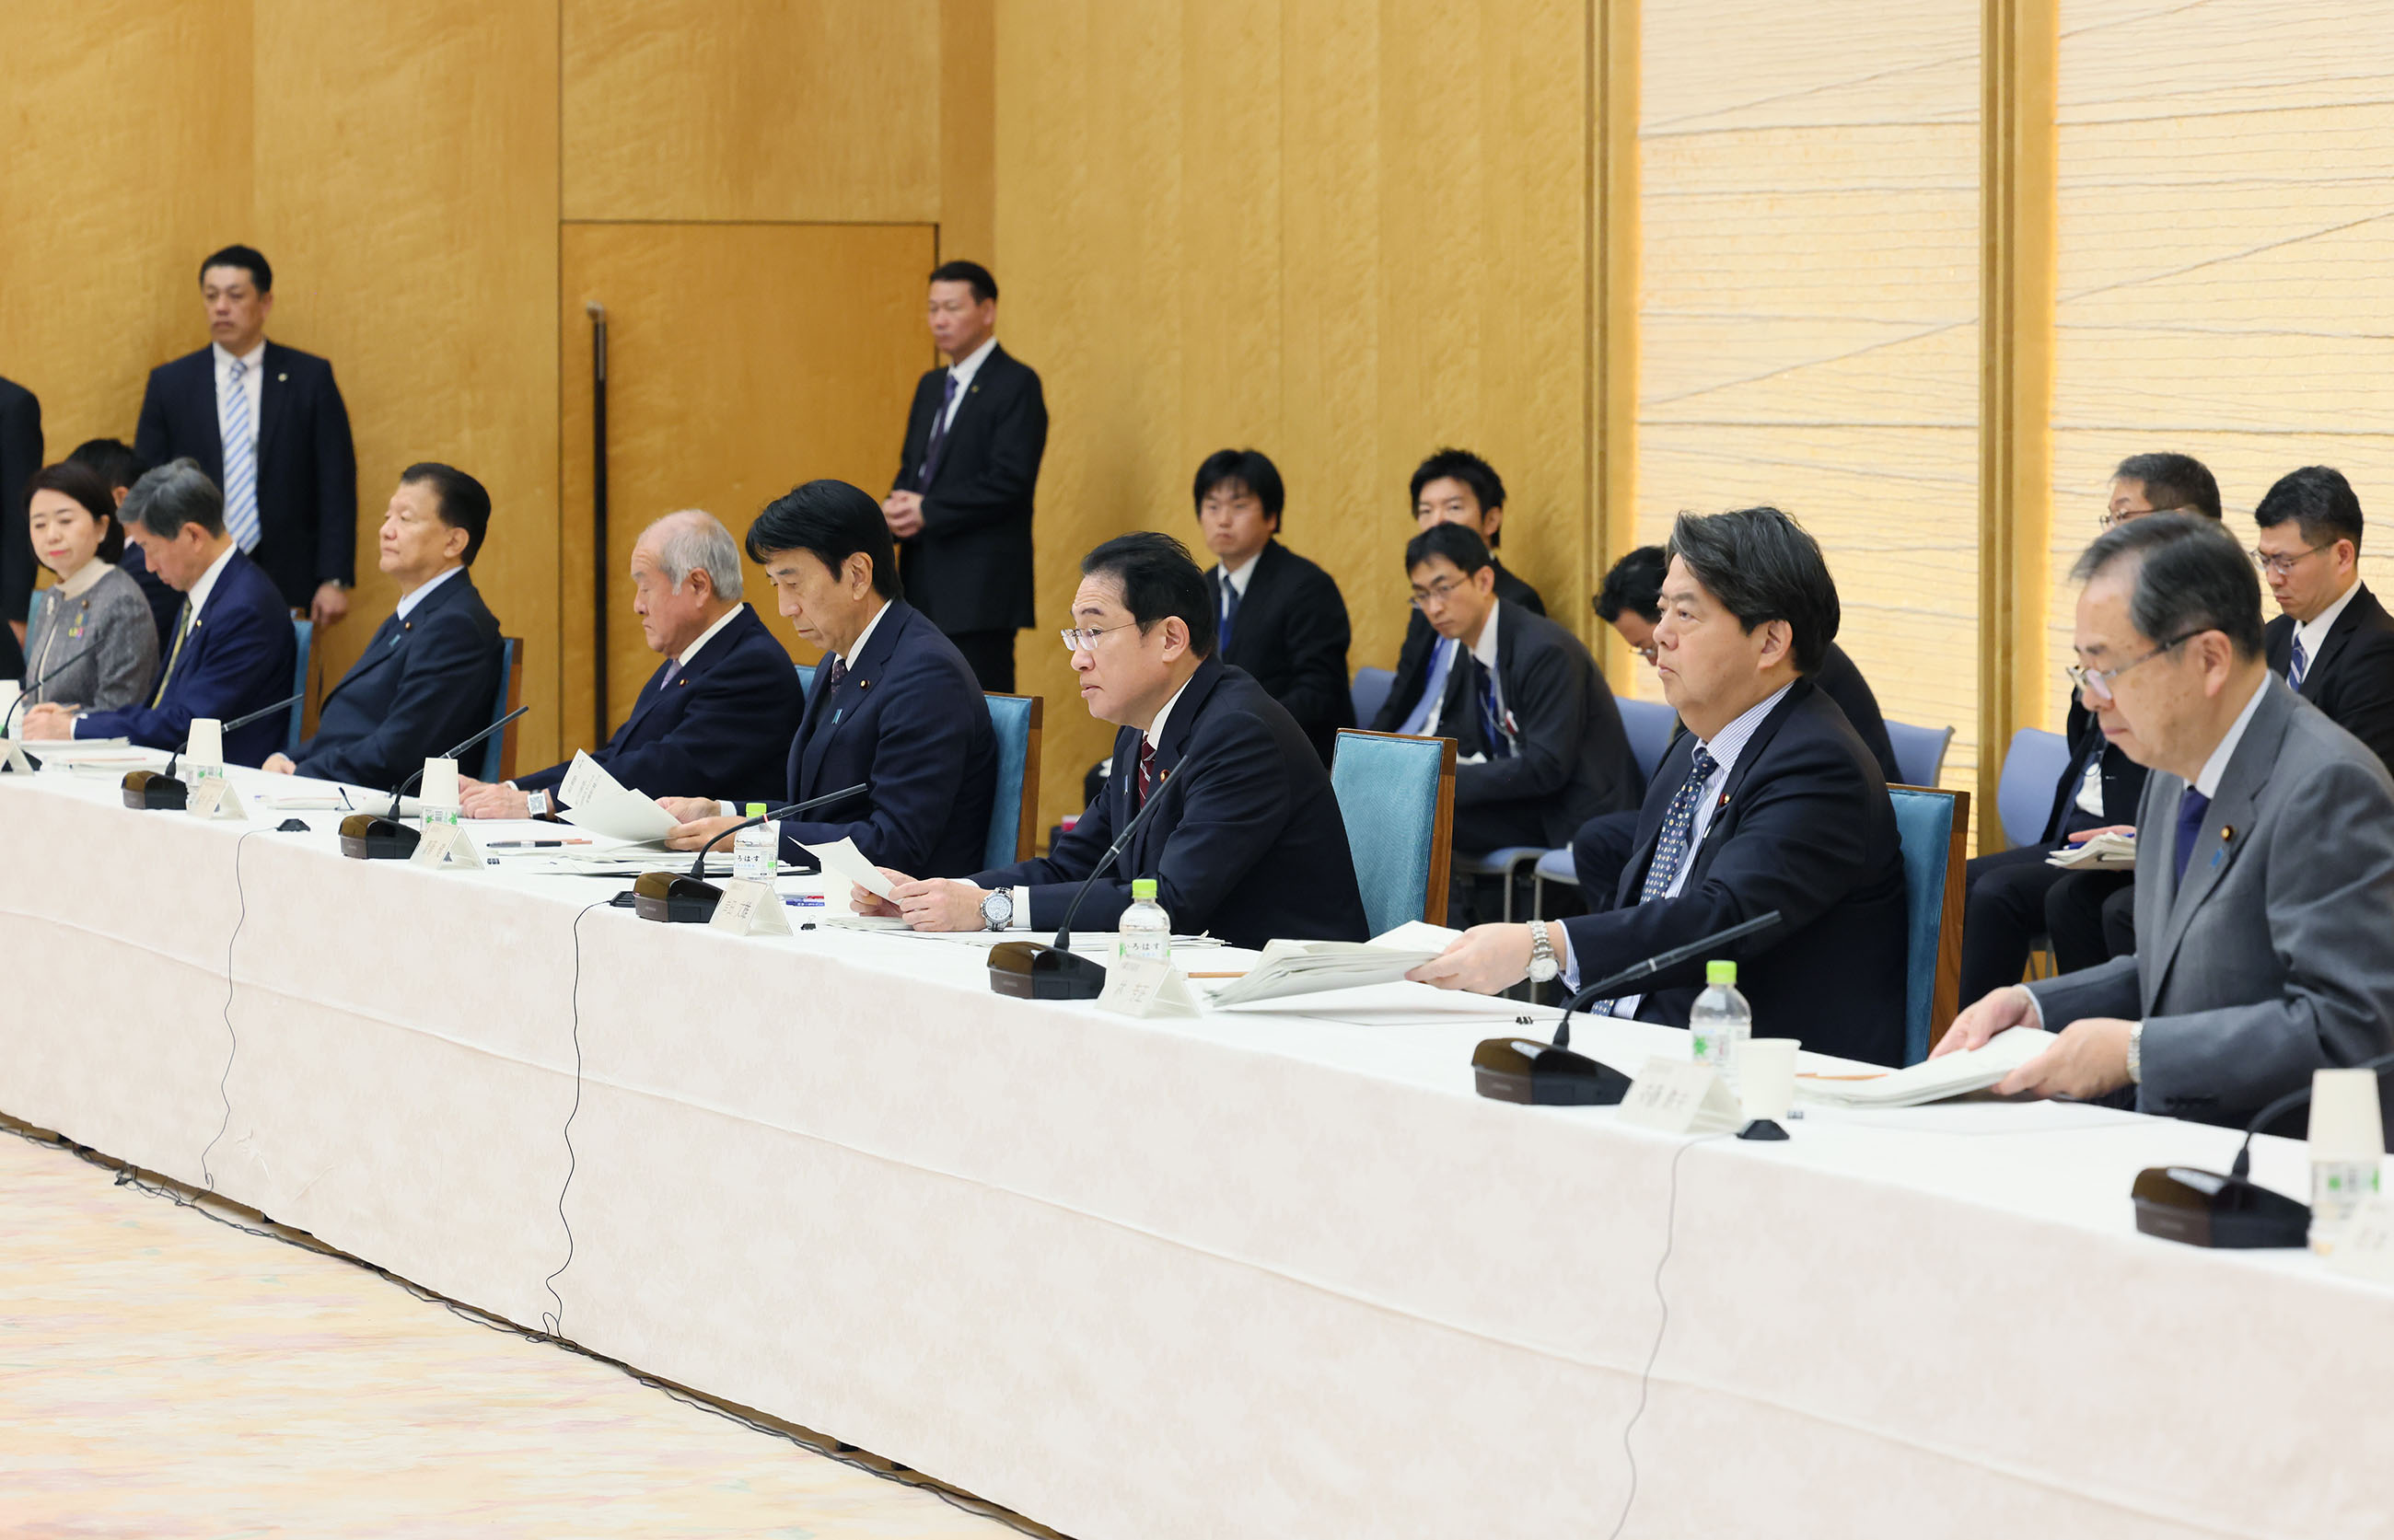 Prime Minister Kishida wrapping up the meeting (5)